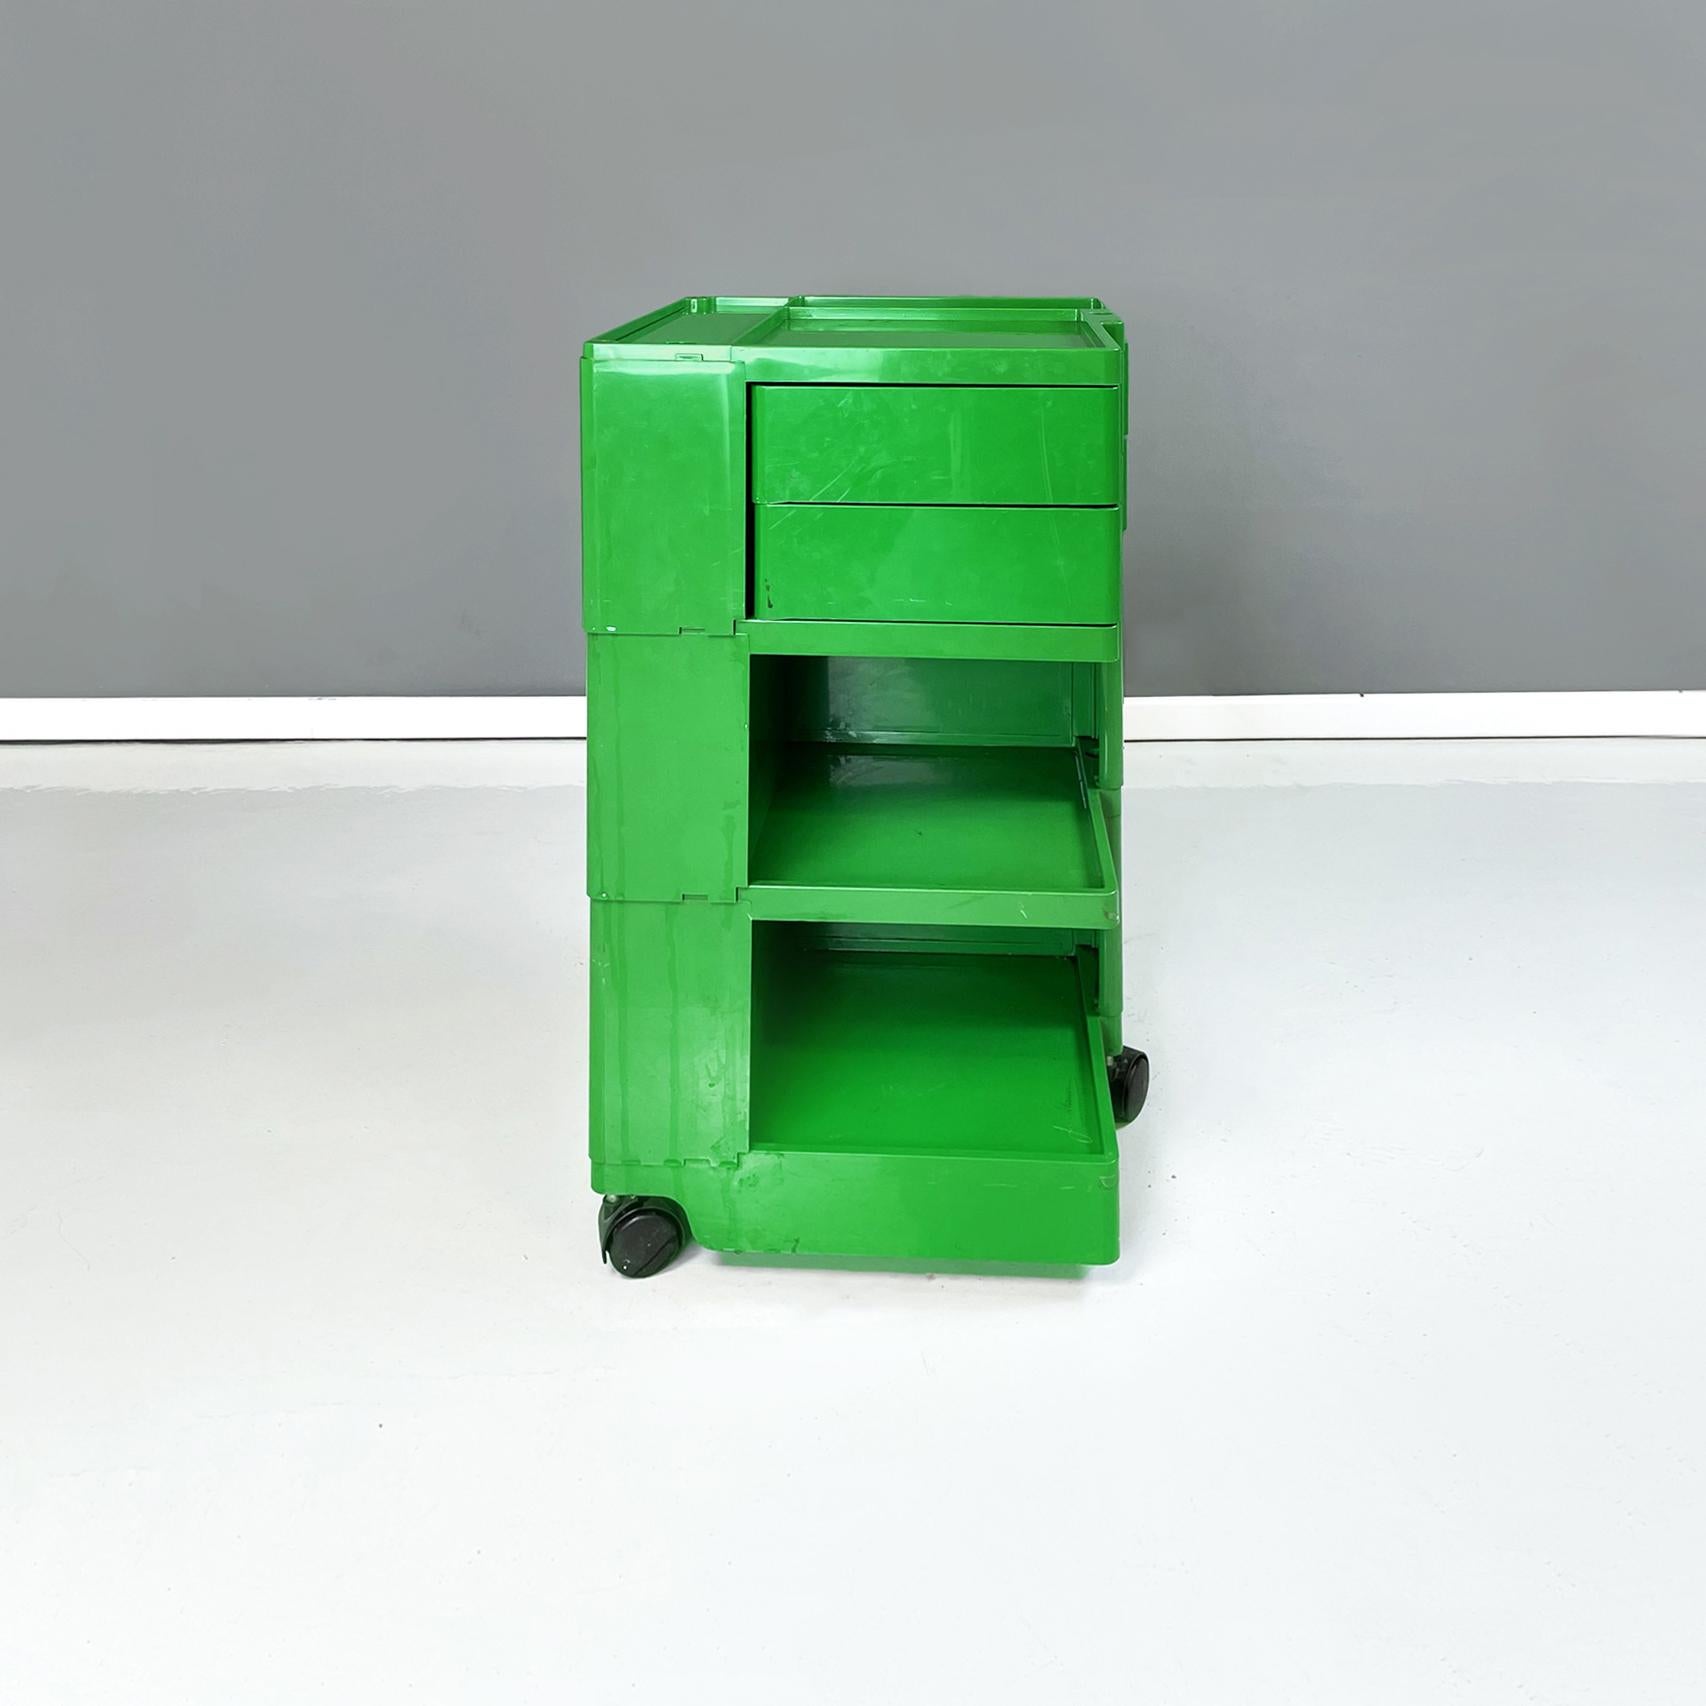 Italian modern Green plastic Cart mod. Boby by Joe Colombo for Bieffeplast, 1968
Cart mod. Boby in bright green plastic. This container trolley is very versatile thanks to its many compartments. On the front it has 2 open square compartments and 2